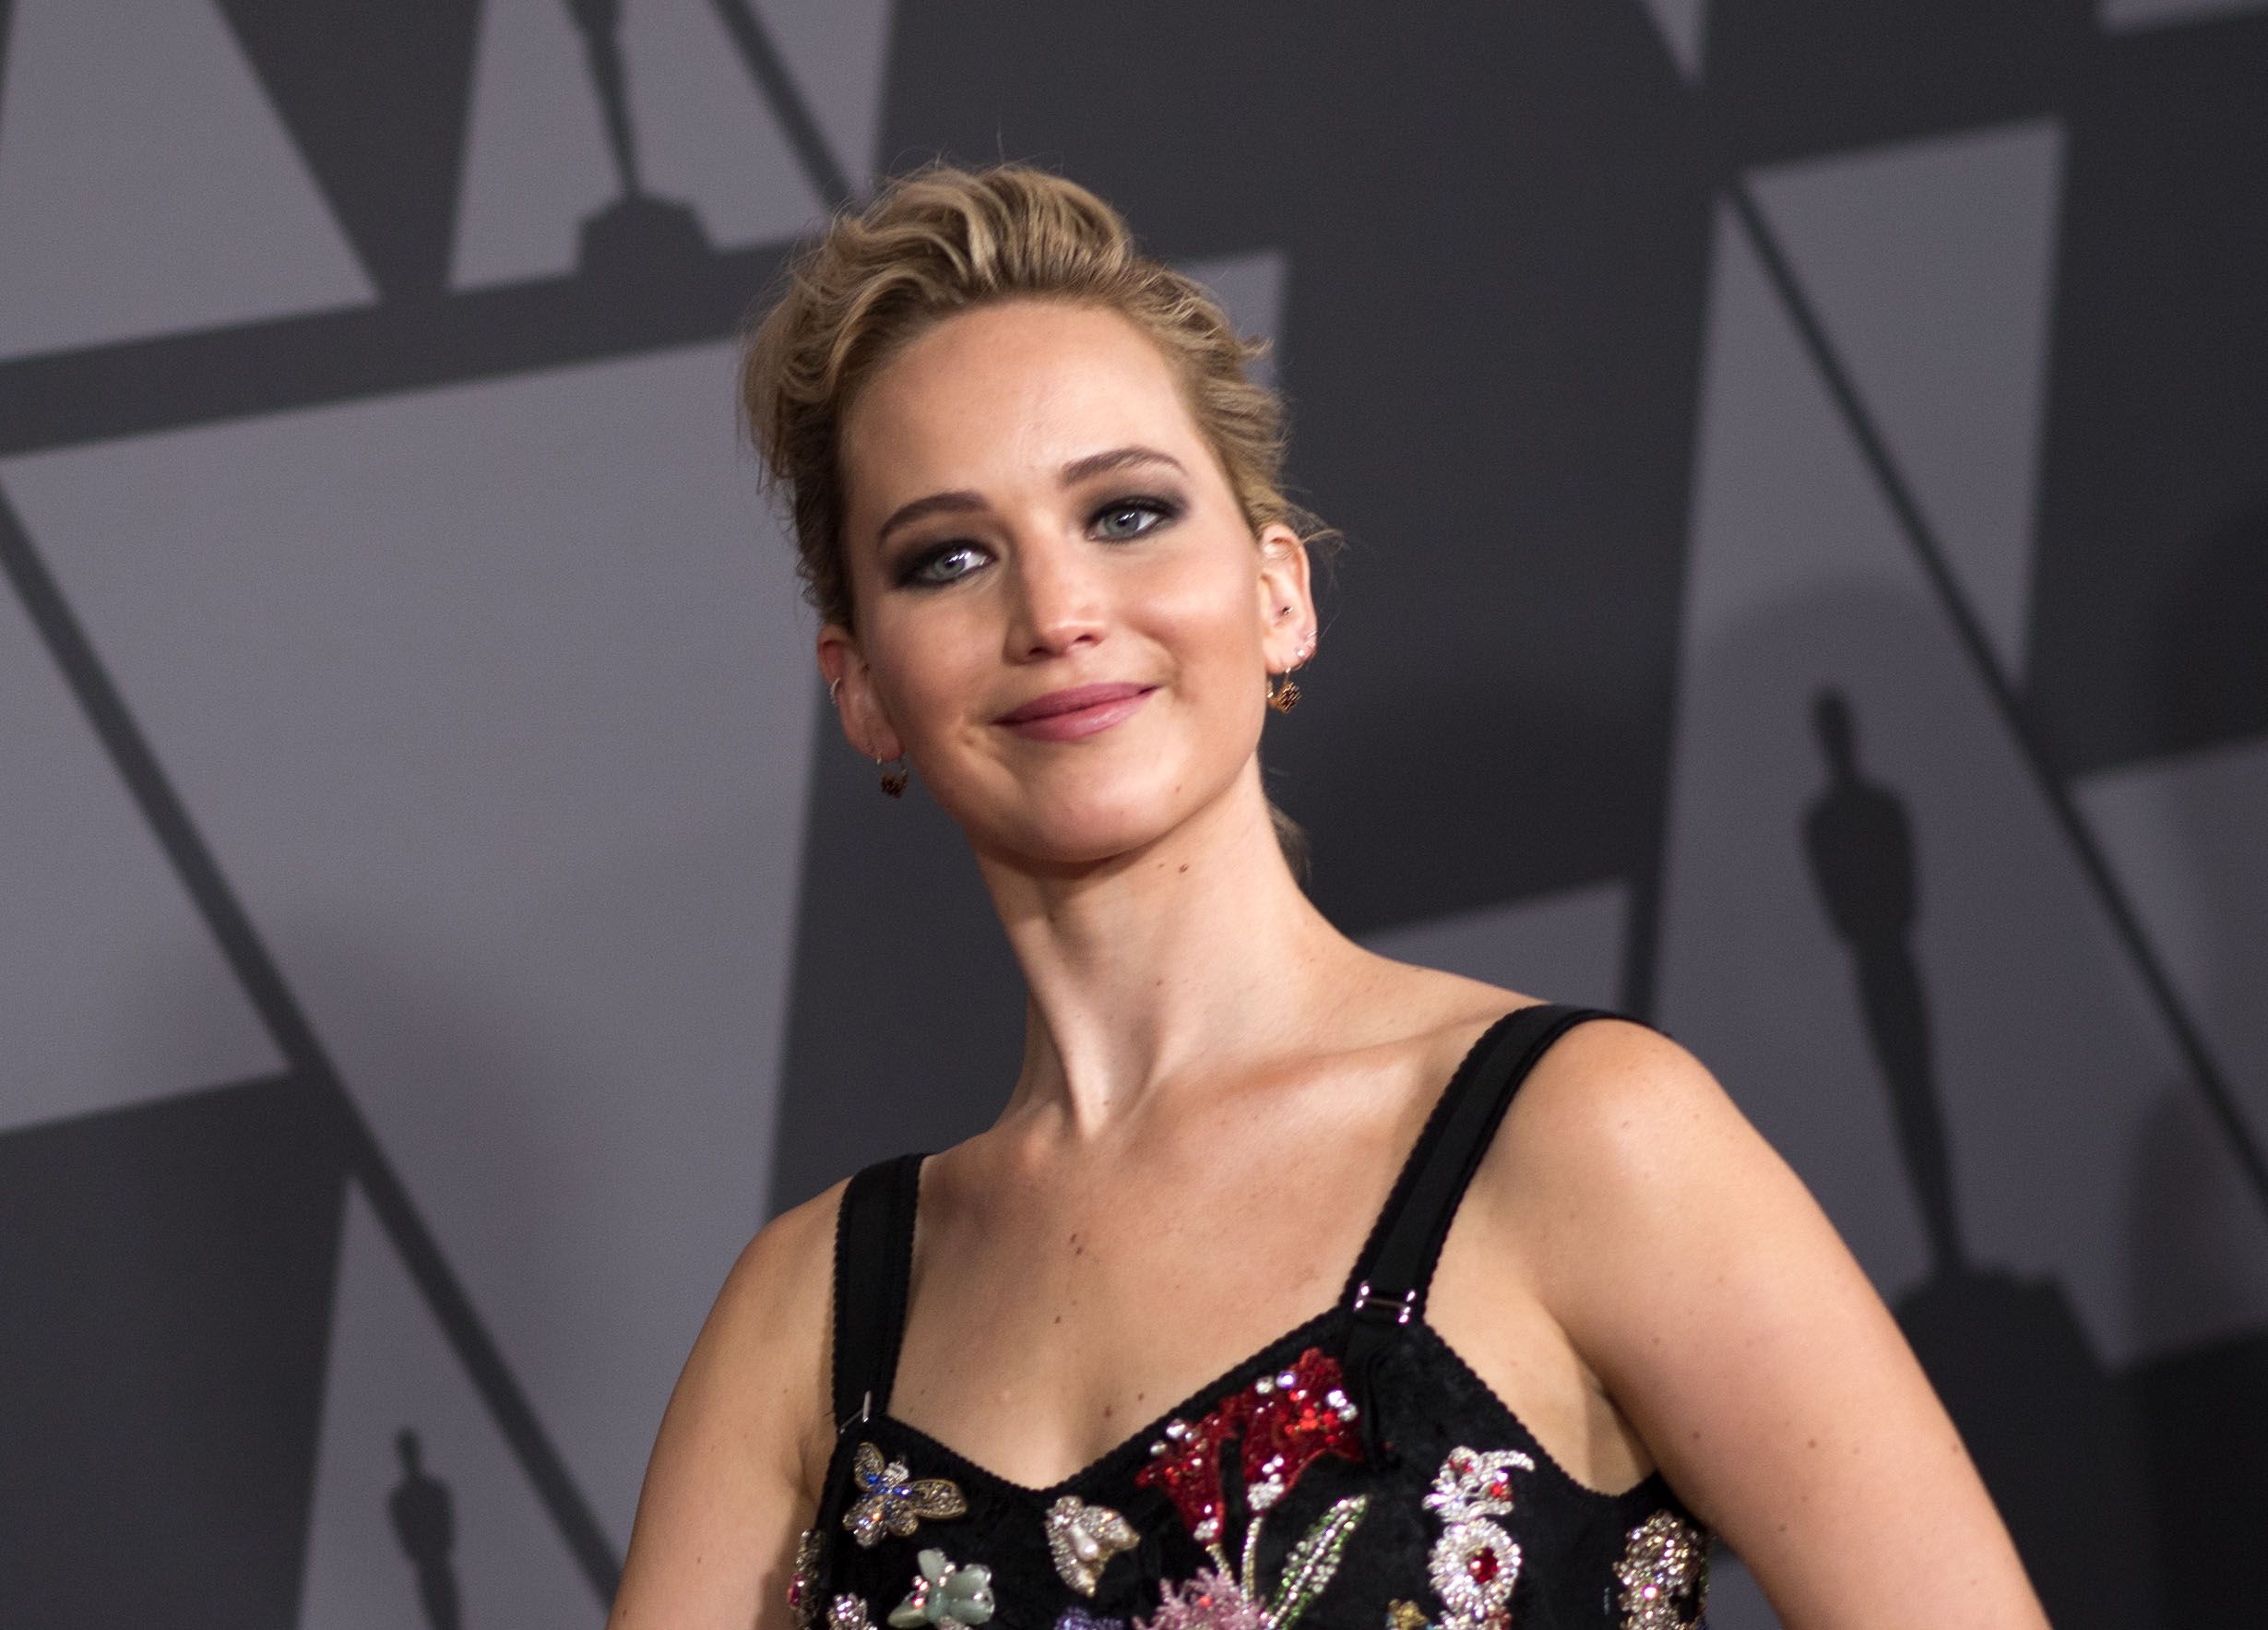 Jennifer Lawrence Is An Asshole To Her Fans According To Jennifer